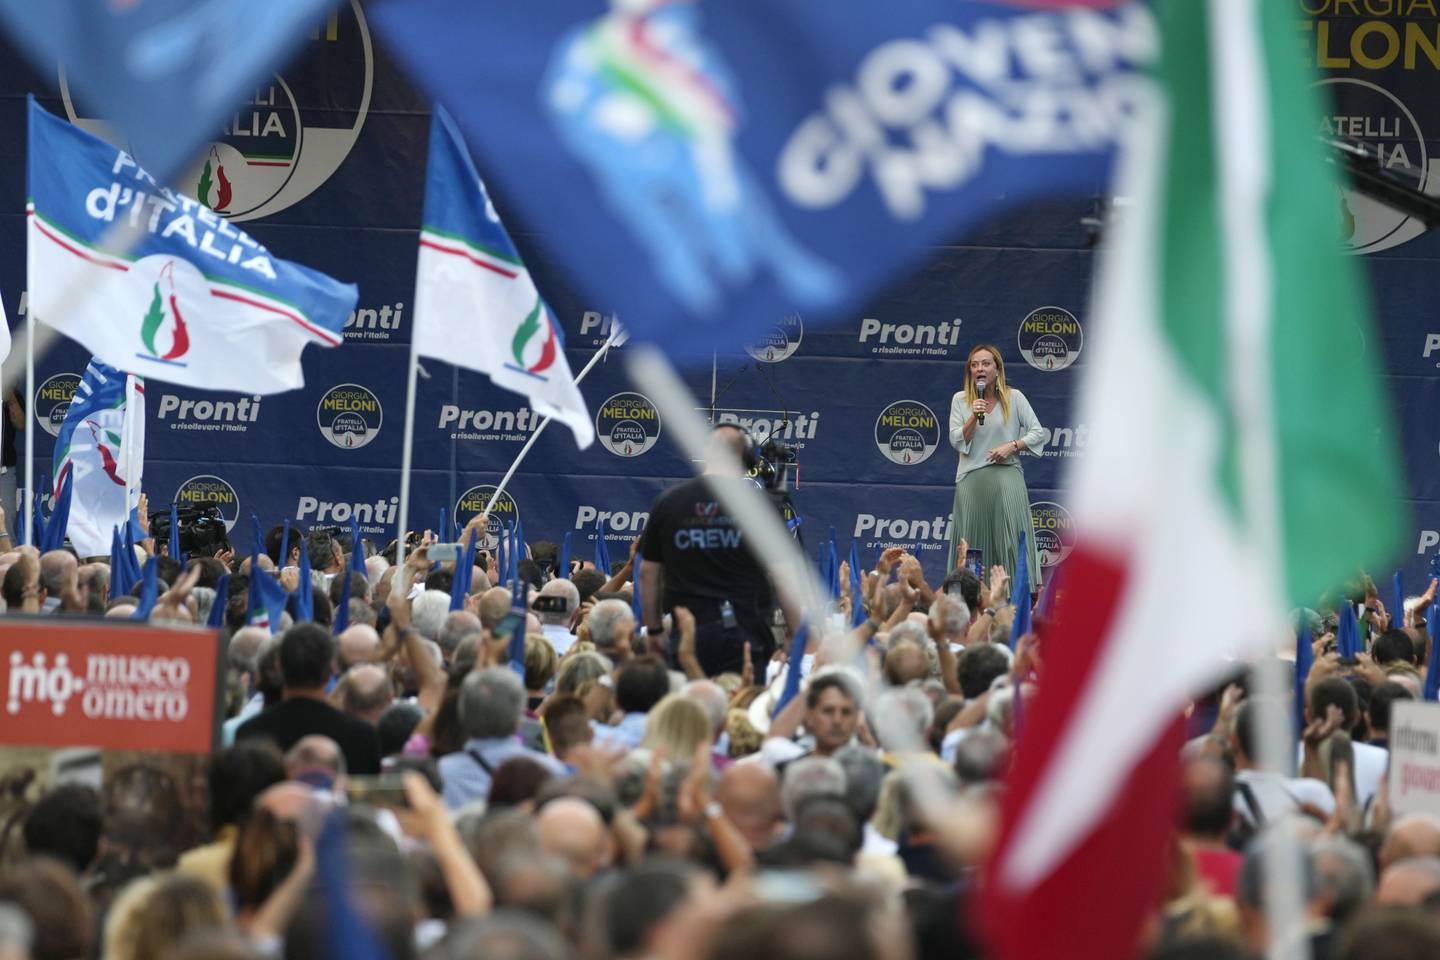 Giorgia Meloni, leader of the right-wing Brothers of Italy party, addresses a rally in Ancona, Italy, on Tuesday. AP Photo